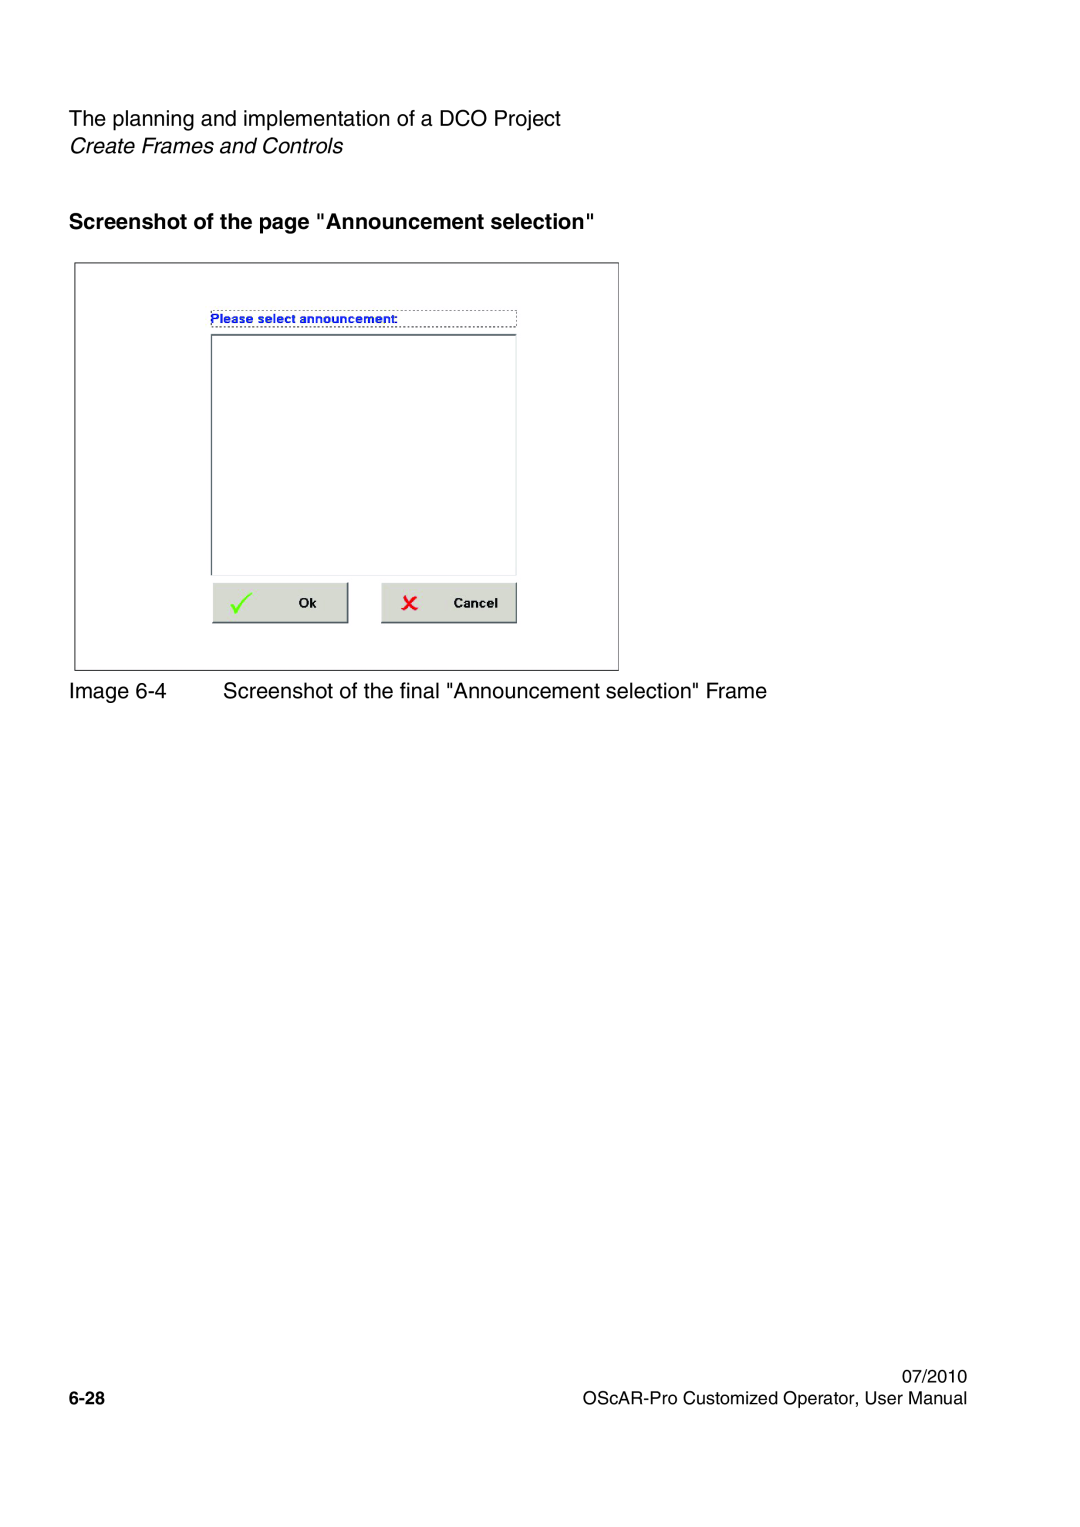 Siemens A31003-51730-U103-7619 user manual Screenshot of the page Announcement selection, Create Frames and Controls, 6-28 